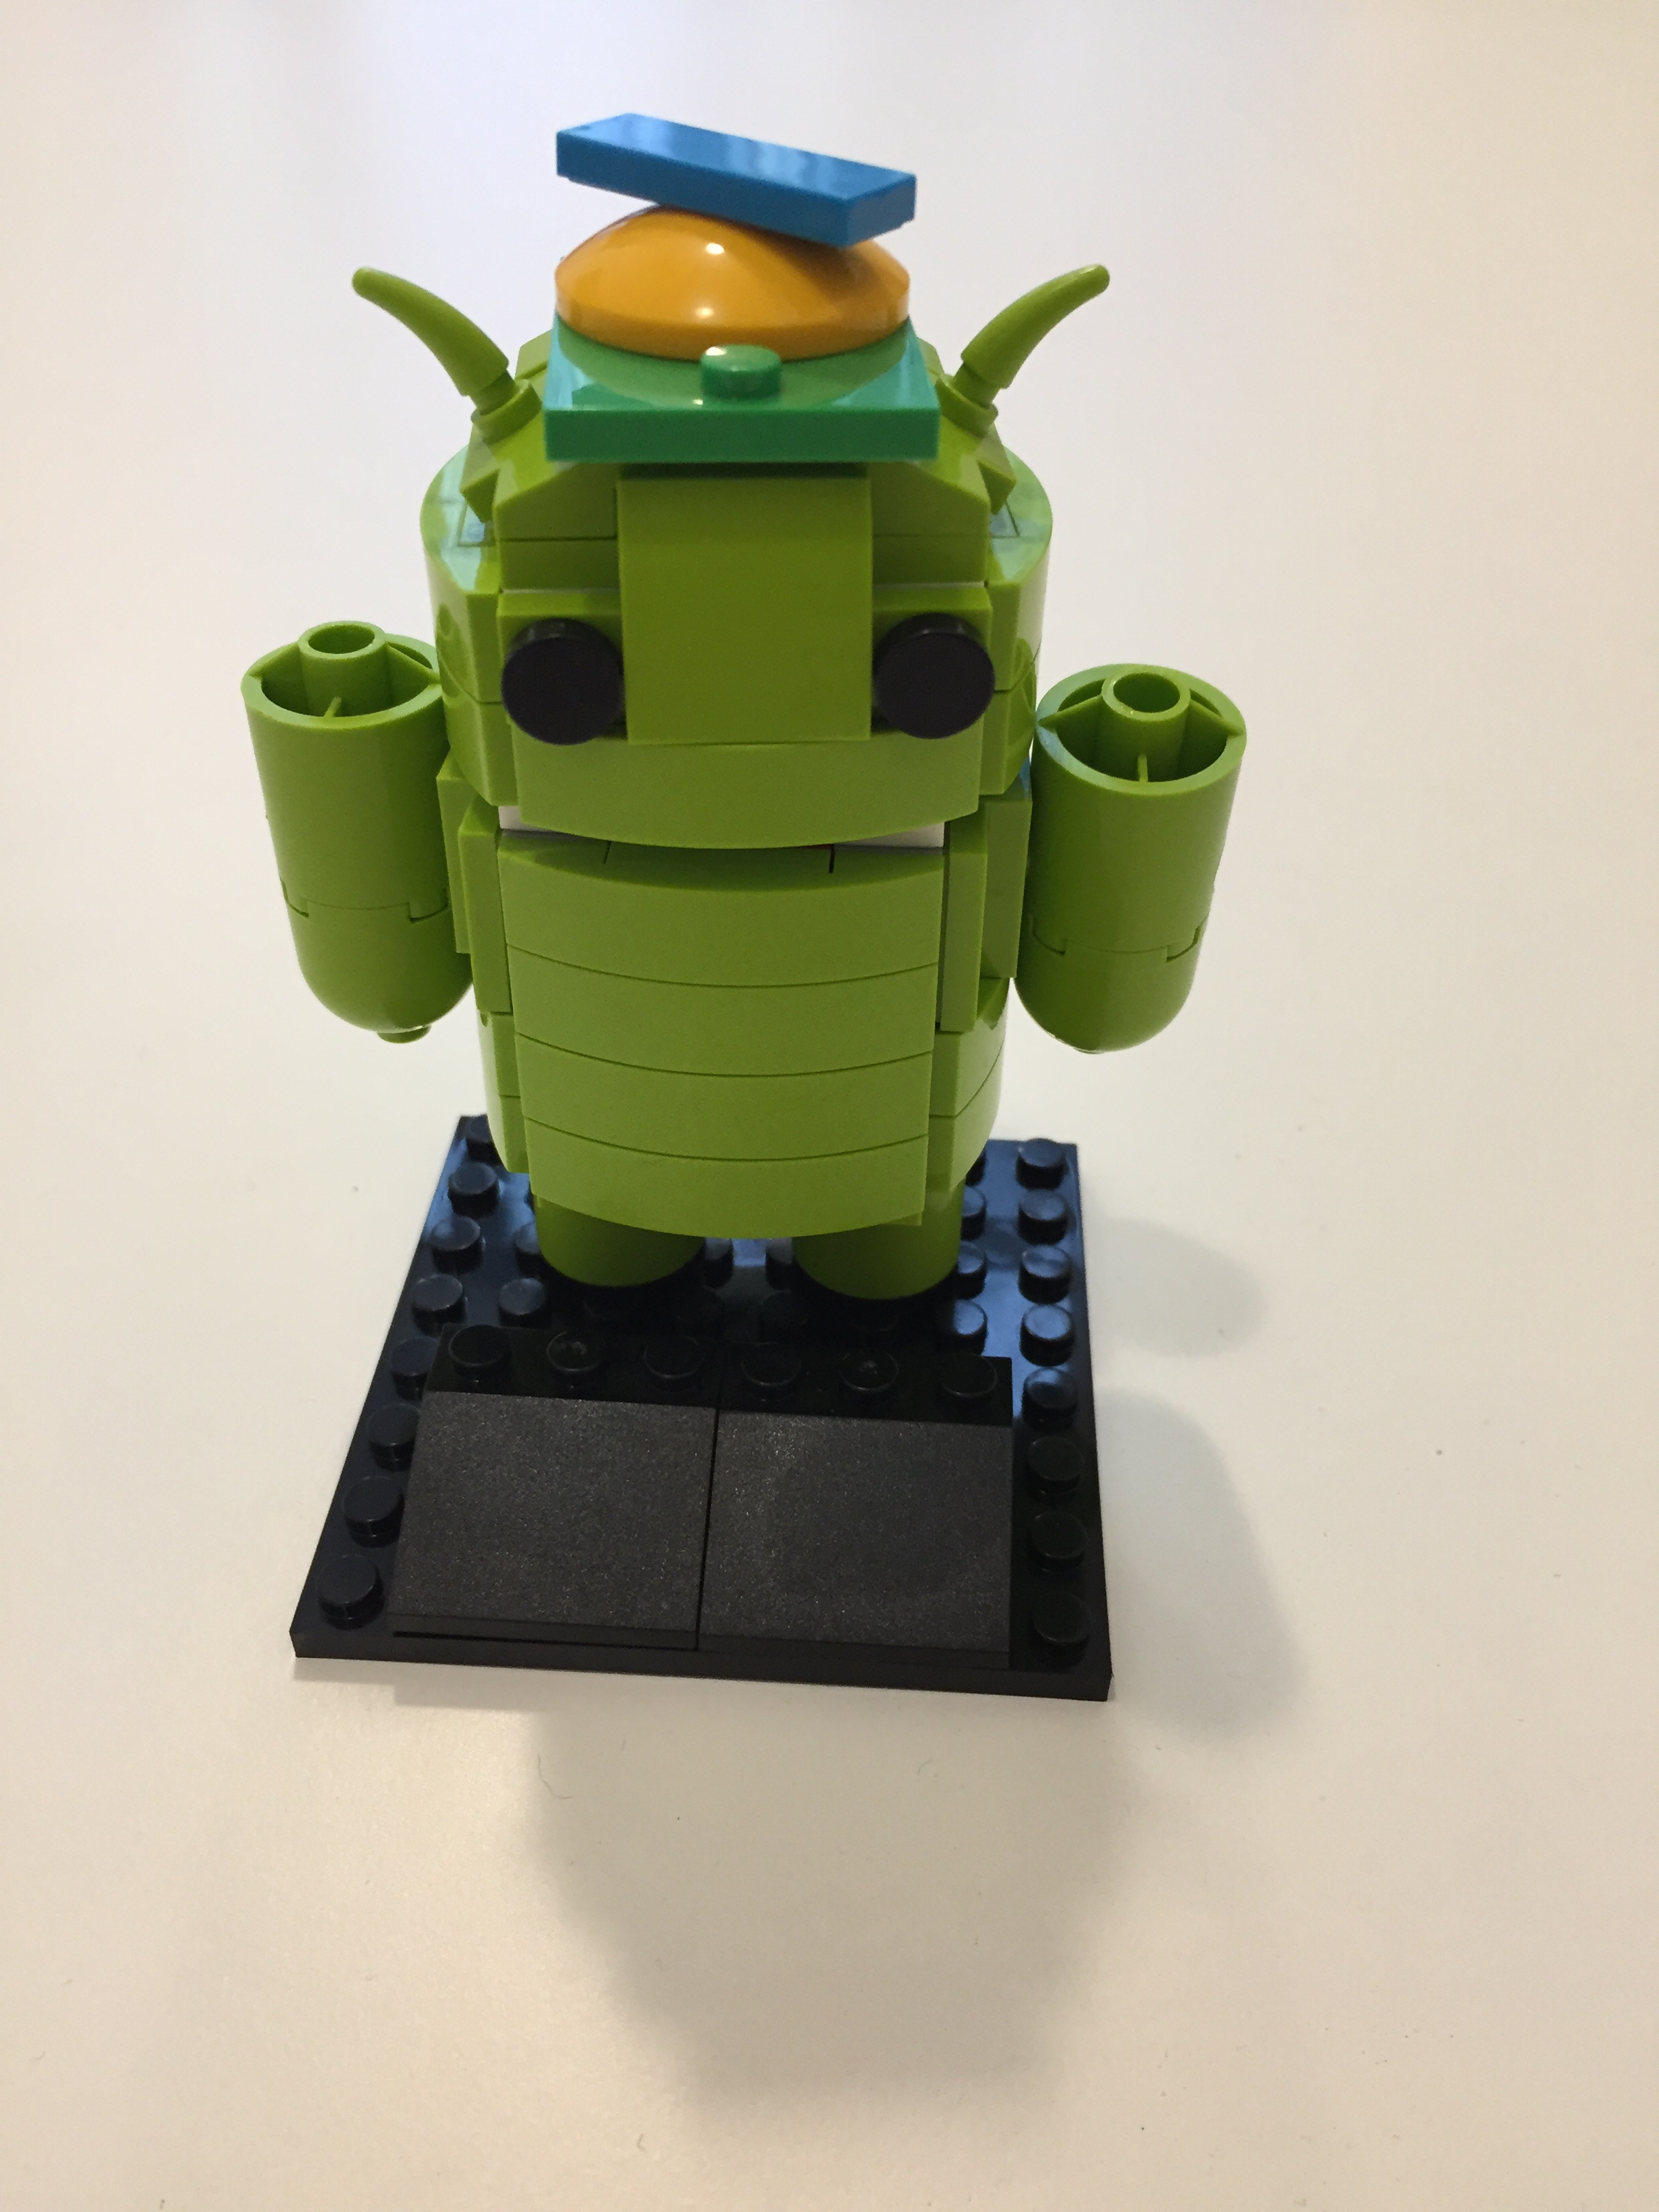 Android robot assembled from blocks